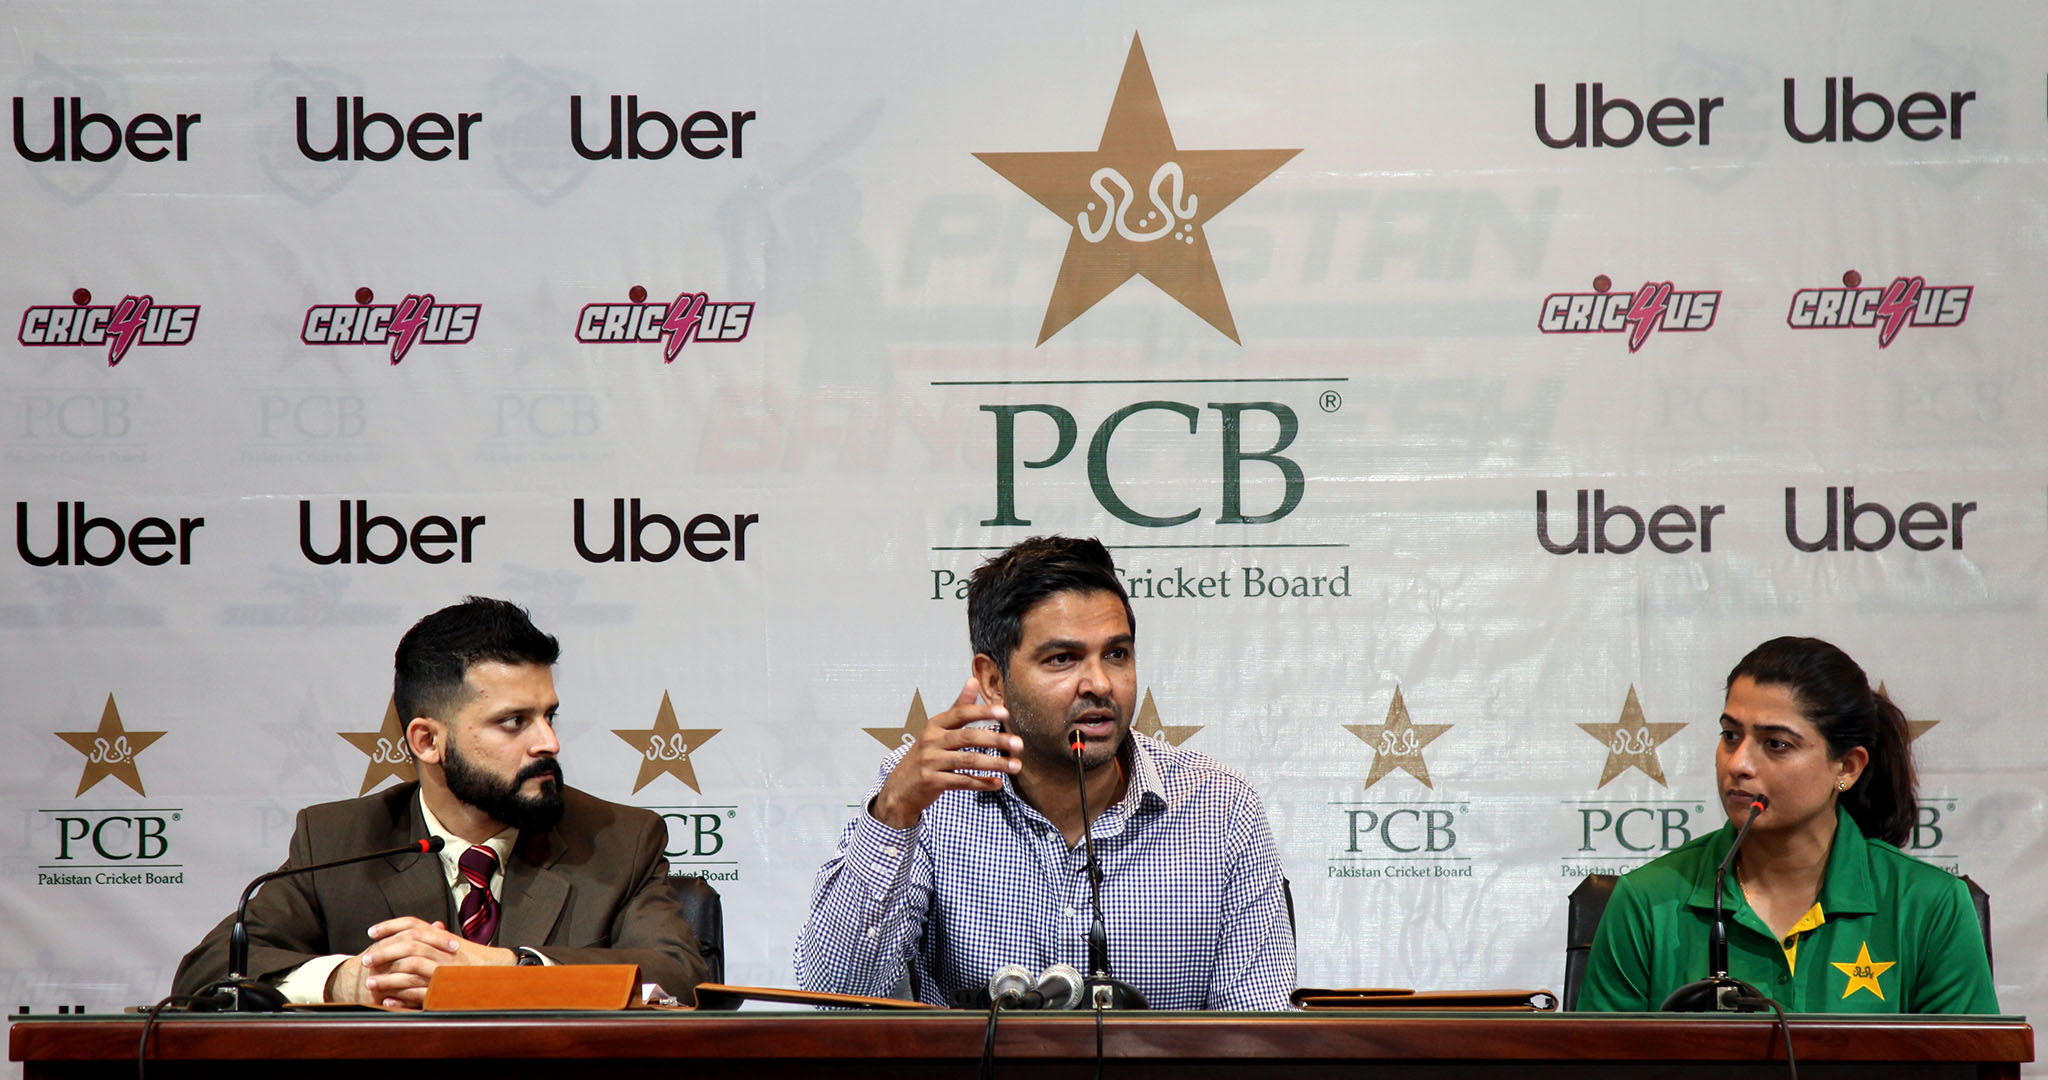 PCB partners with Uber for ground-breaking girls’ school participation program